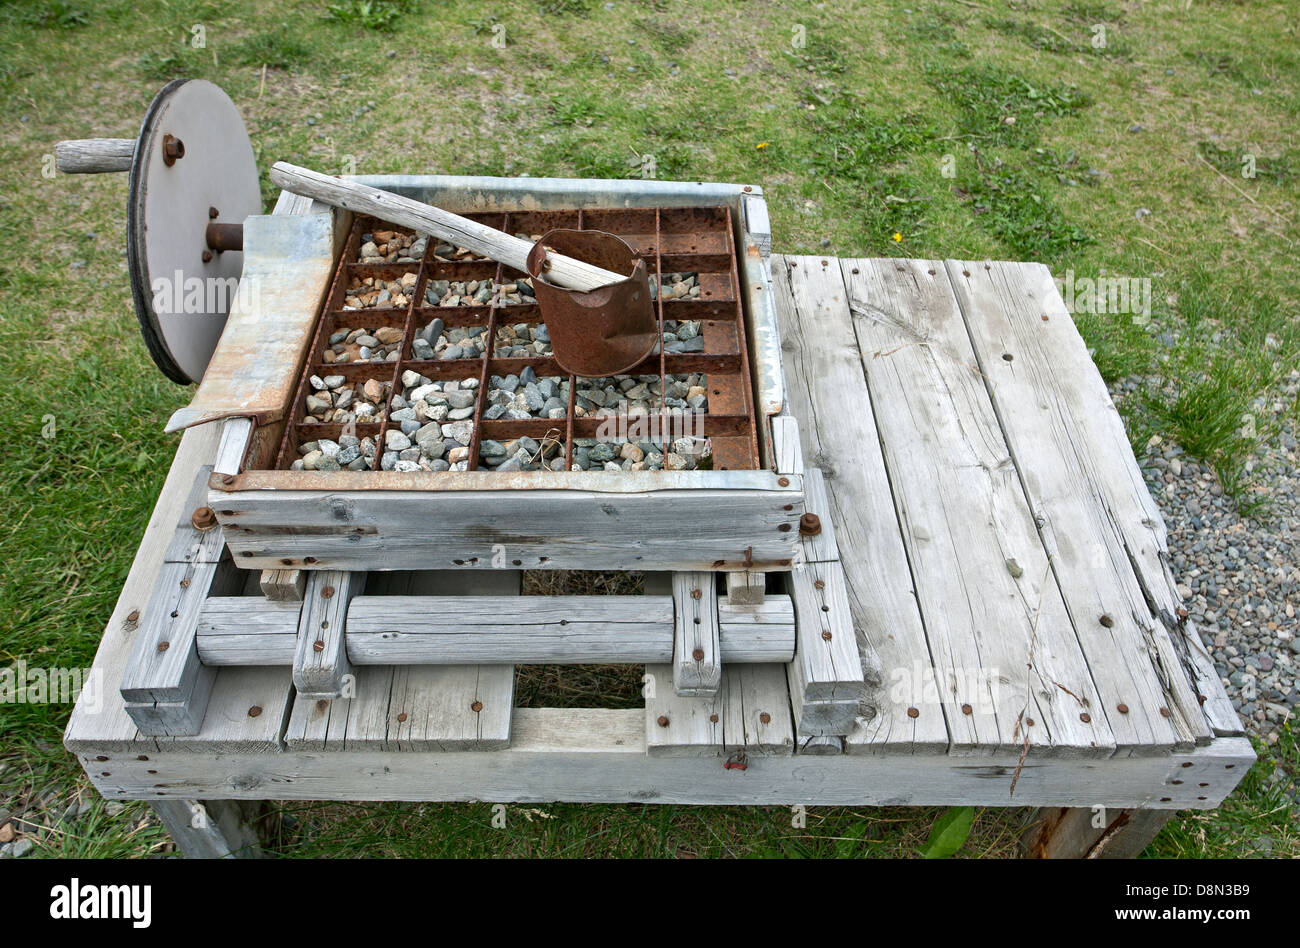 Rocker box used to separate the gold from the gravel. MacBride Museum of Yukon History. Whitehorse. Canada Stock Photo